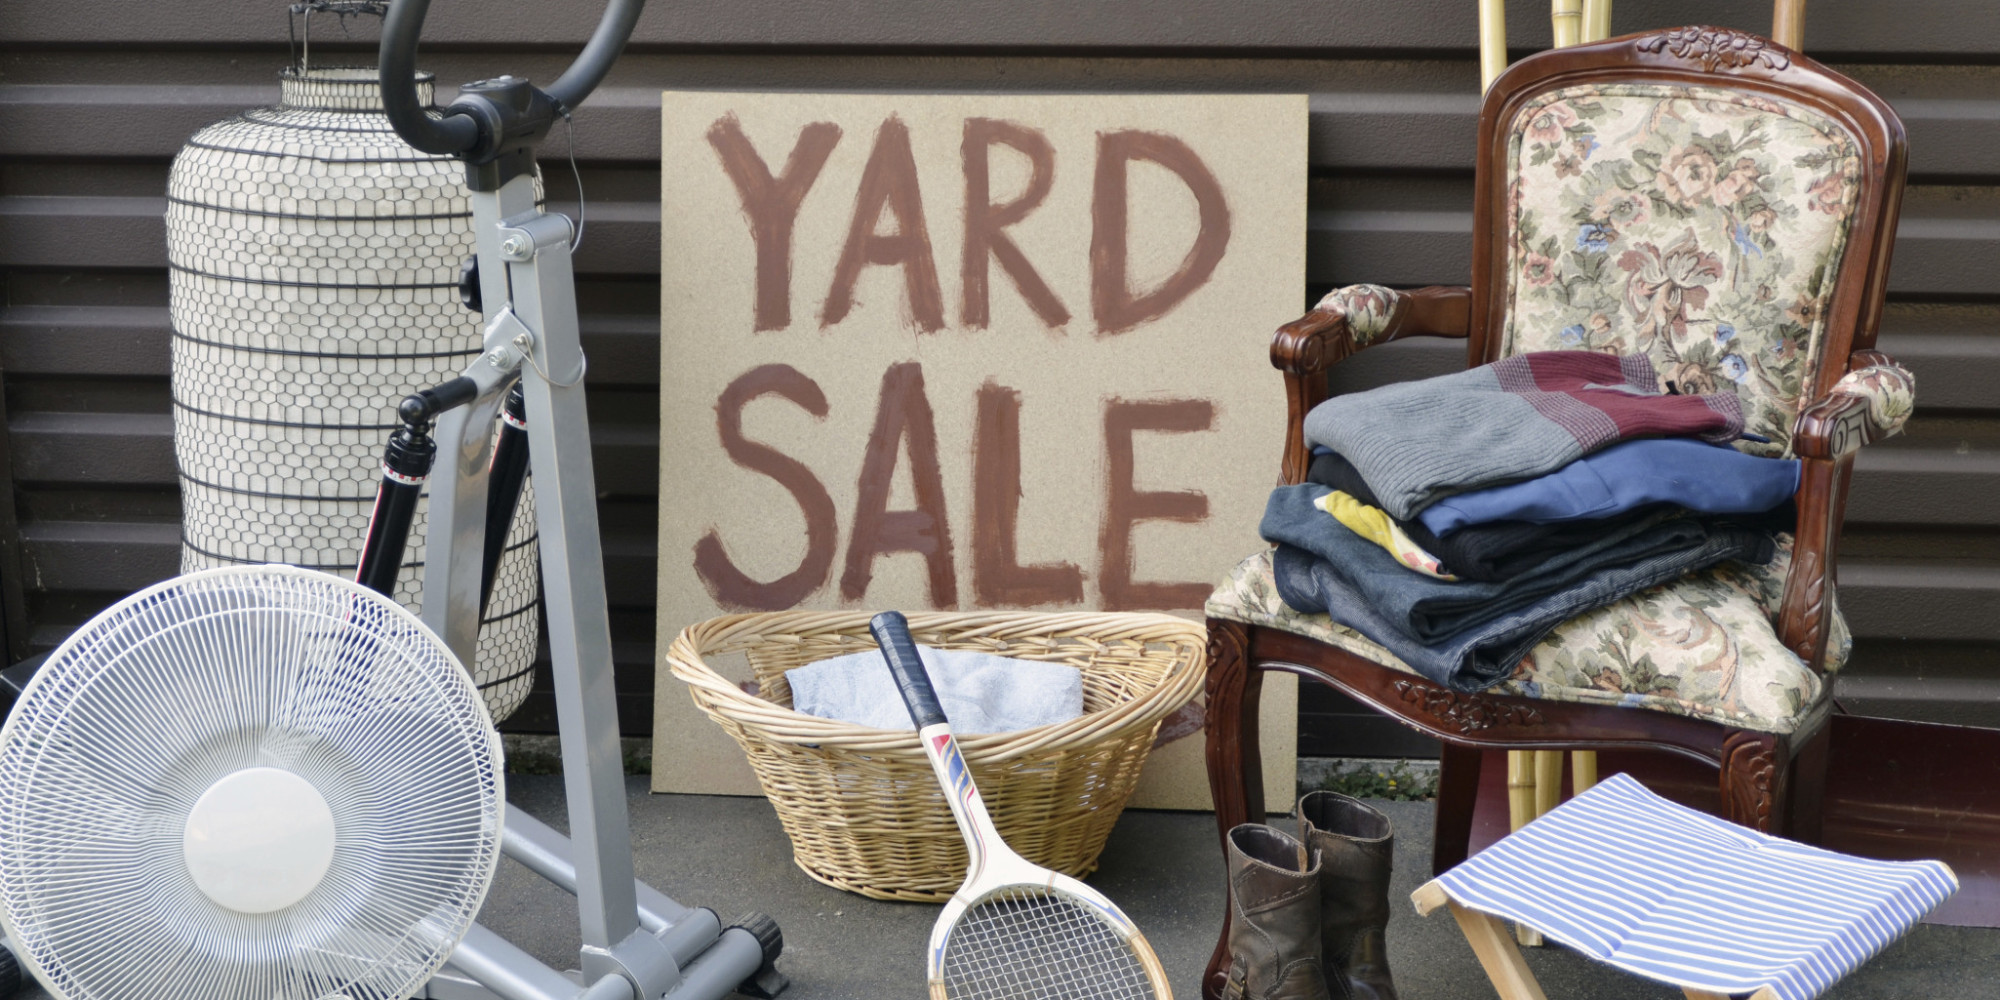 11 Things No One Will Buy At Your Yard Sale HuffPost